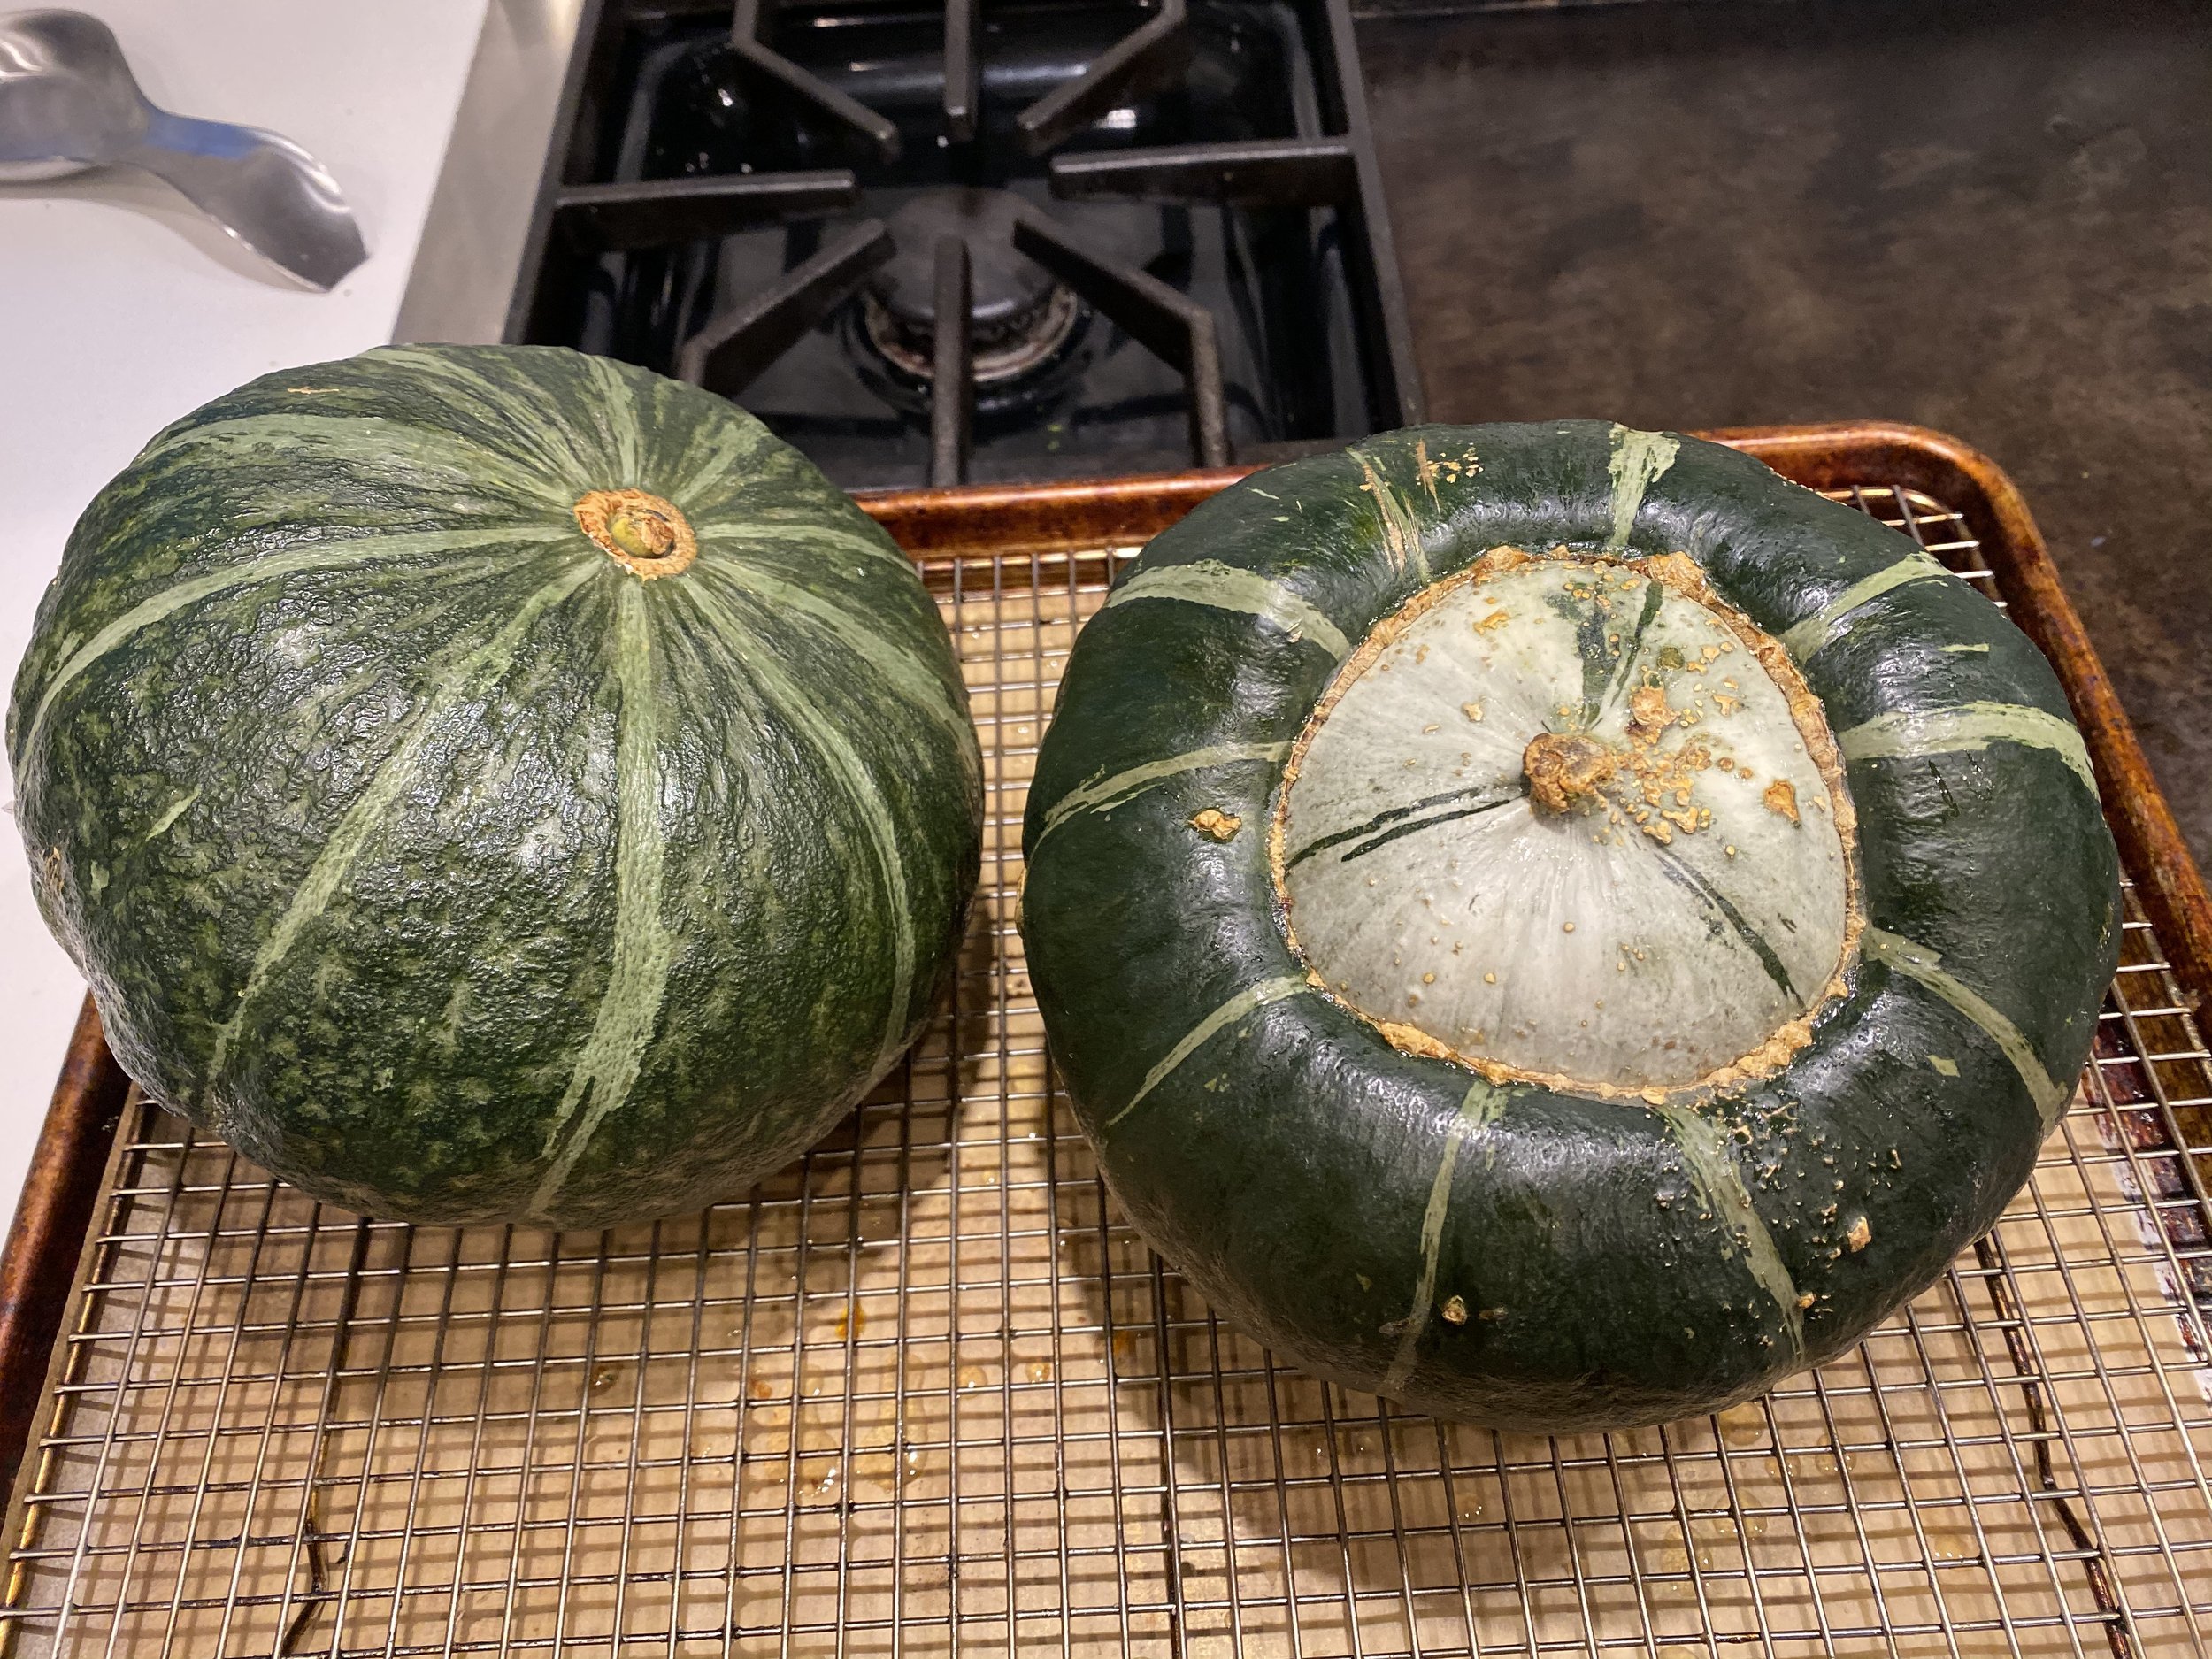 The kabocha (left) has a button-like base in contrast to the open ring on the buttercup (right).